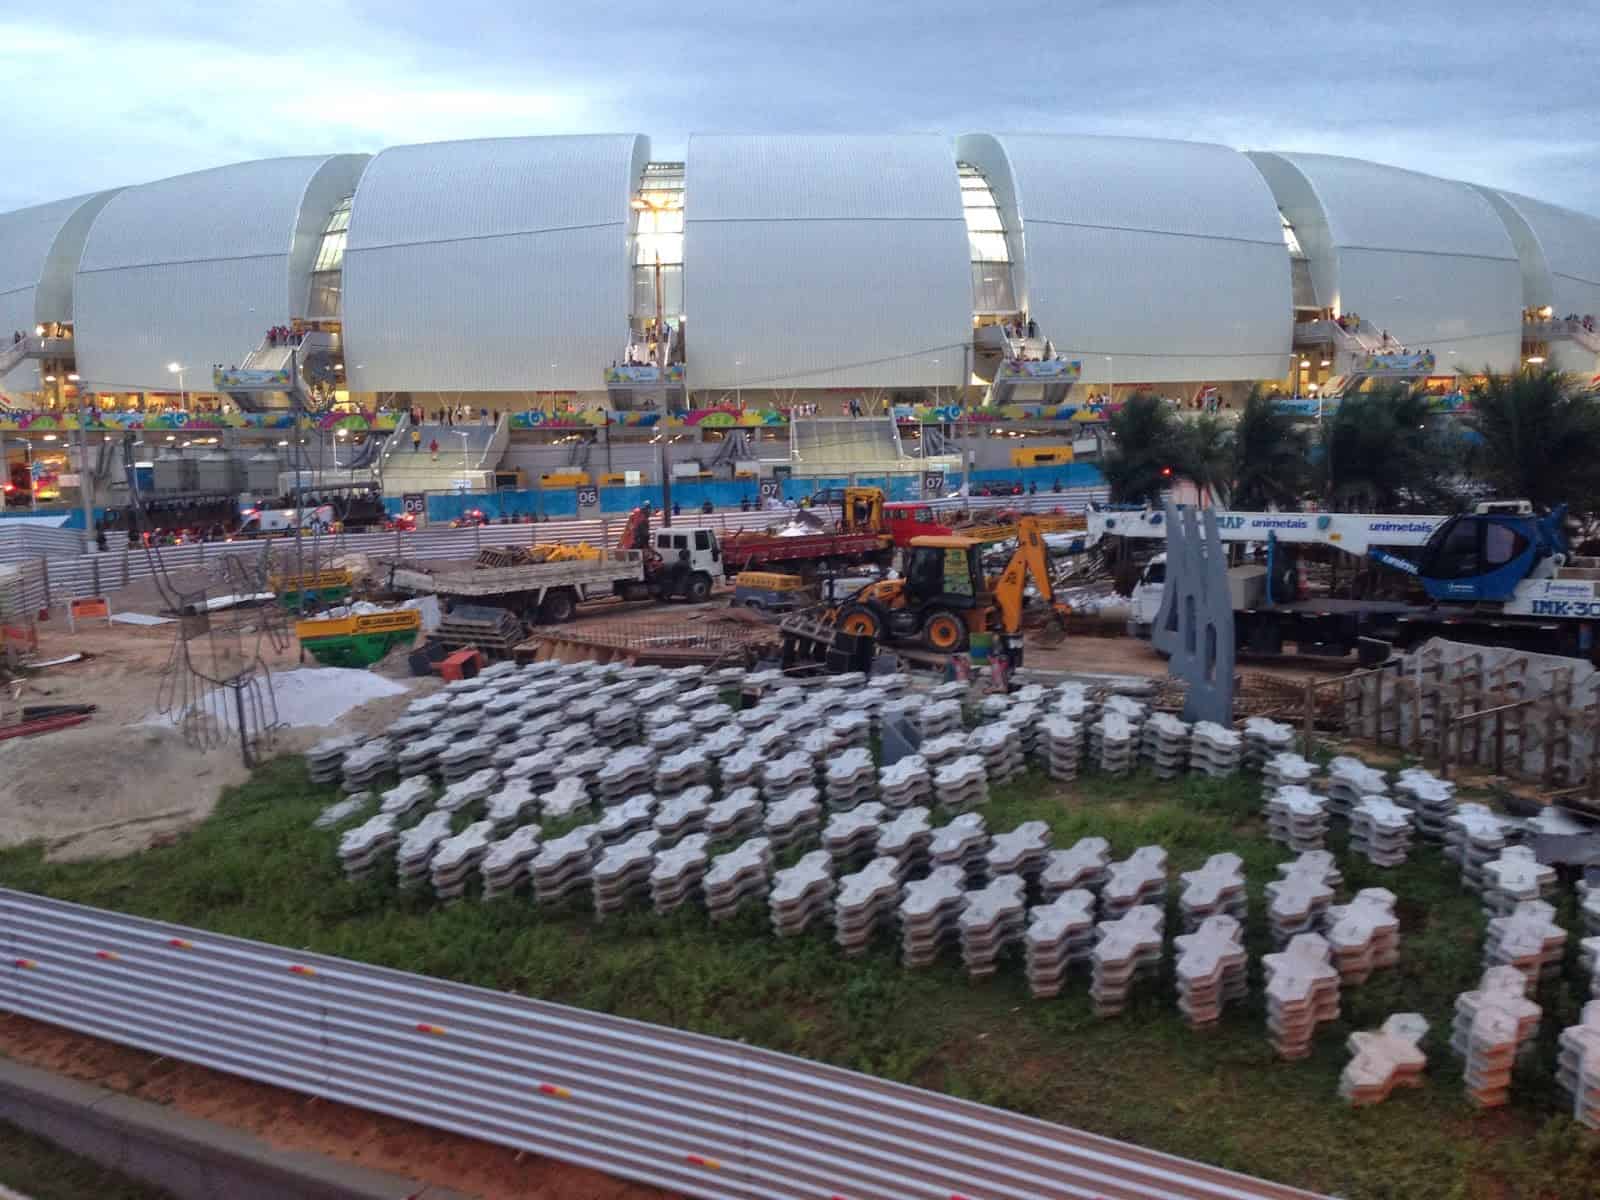 Construction zone at Arena das Dunas in Natal, Brazil